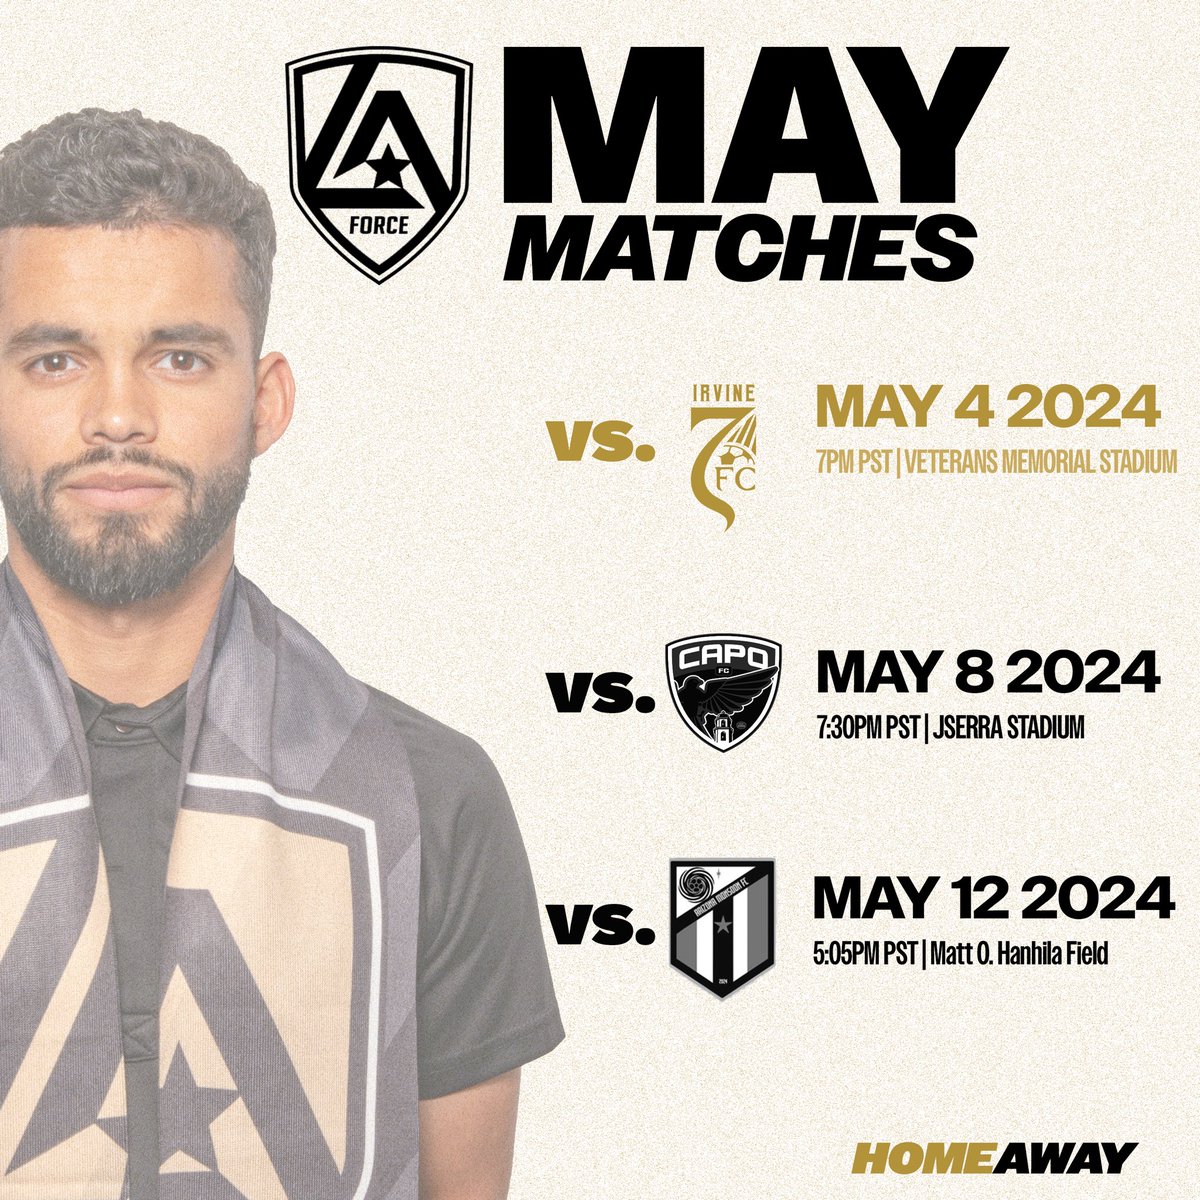 1 big reason to pack The Vet this Saturday‼️

The Gold & Black are home only one time in May. Make it count. Secure your seats today. 

🎟️ bit.ly/3woK6Z9. 

#VamosForce